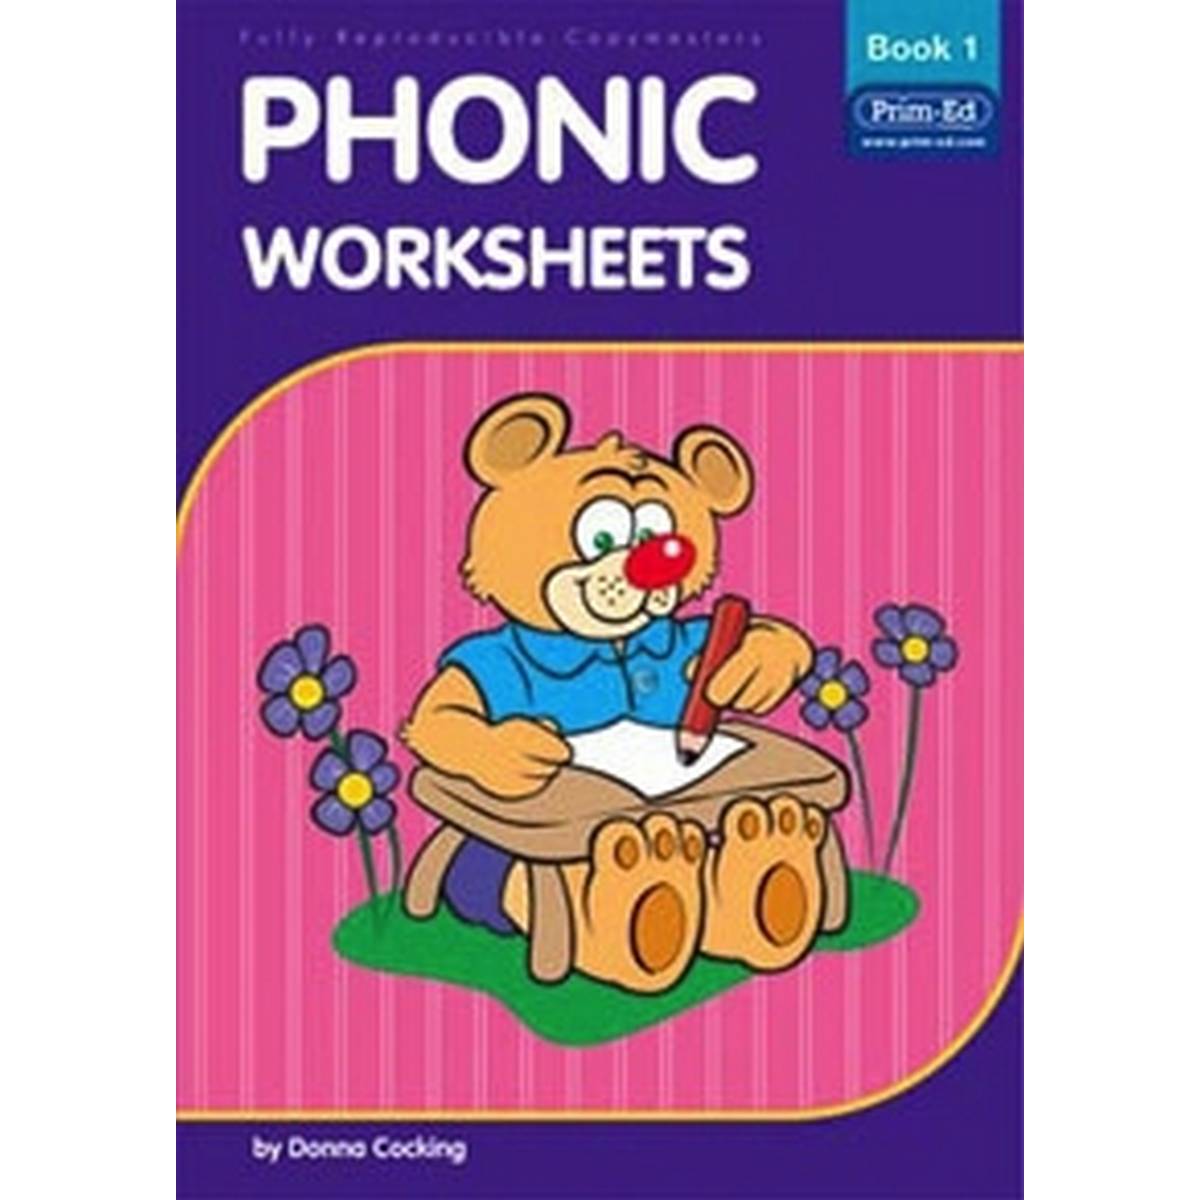 Phonic Worksheets Book 1